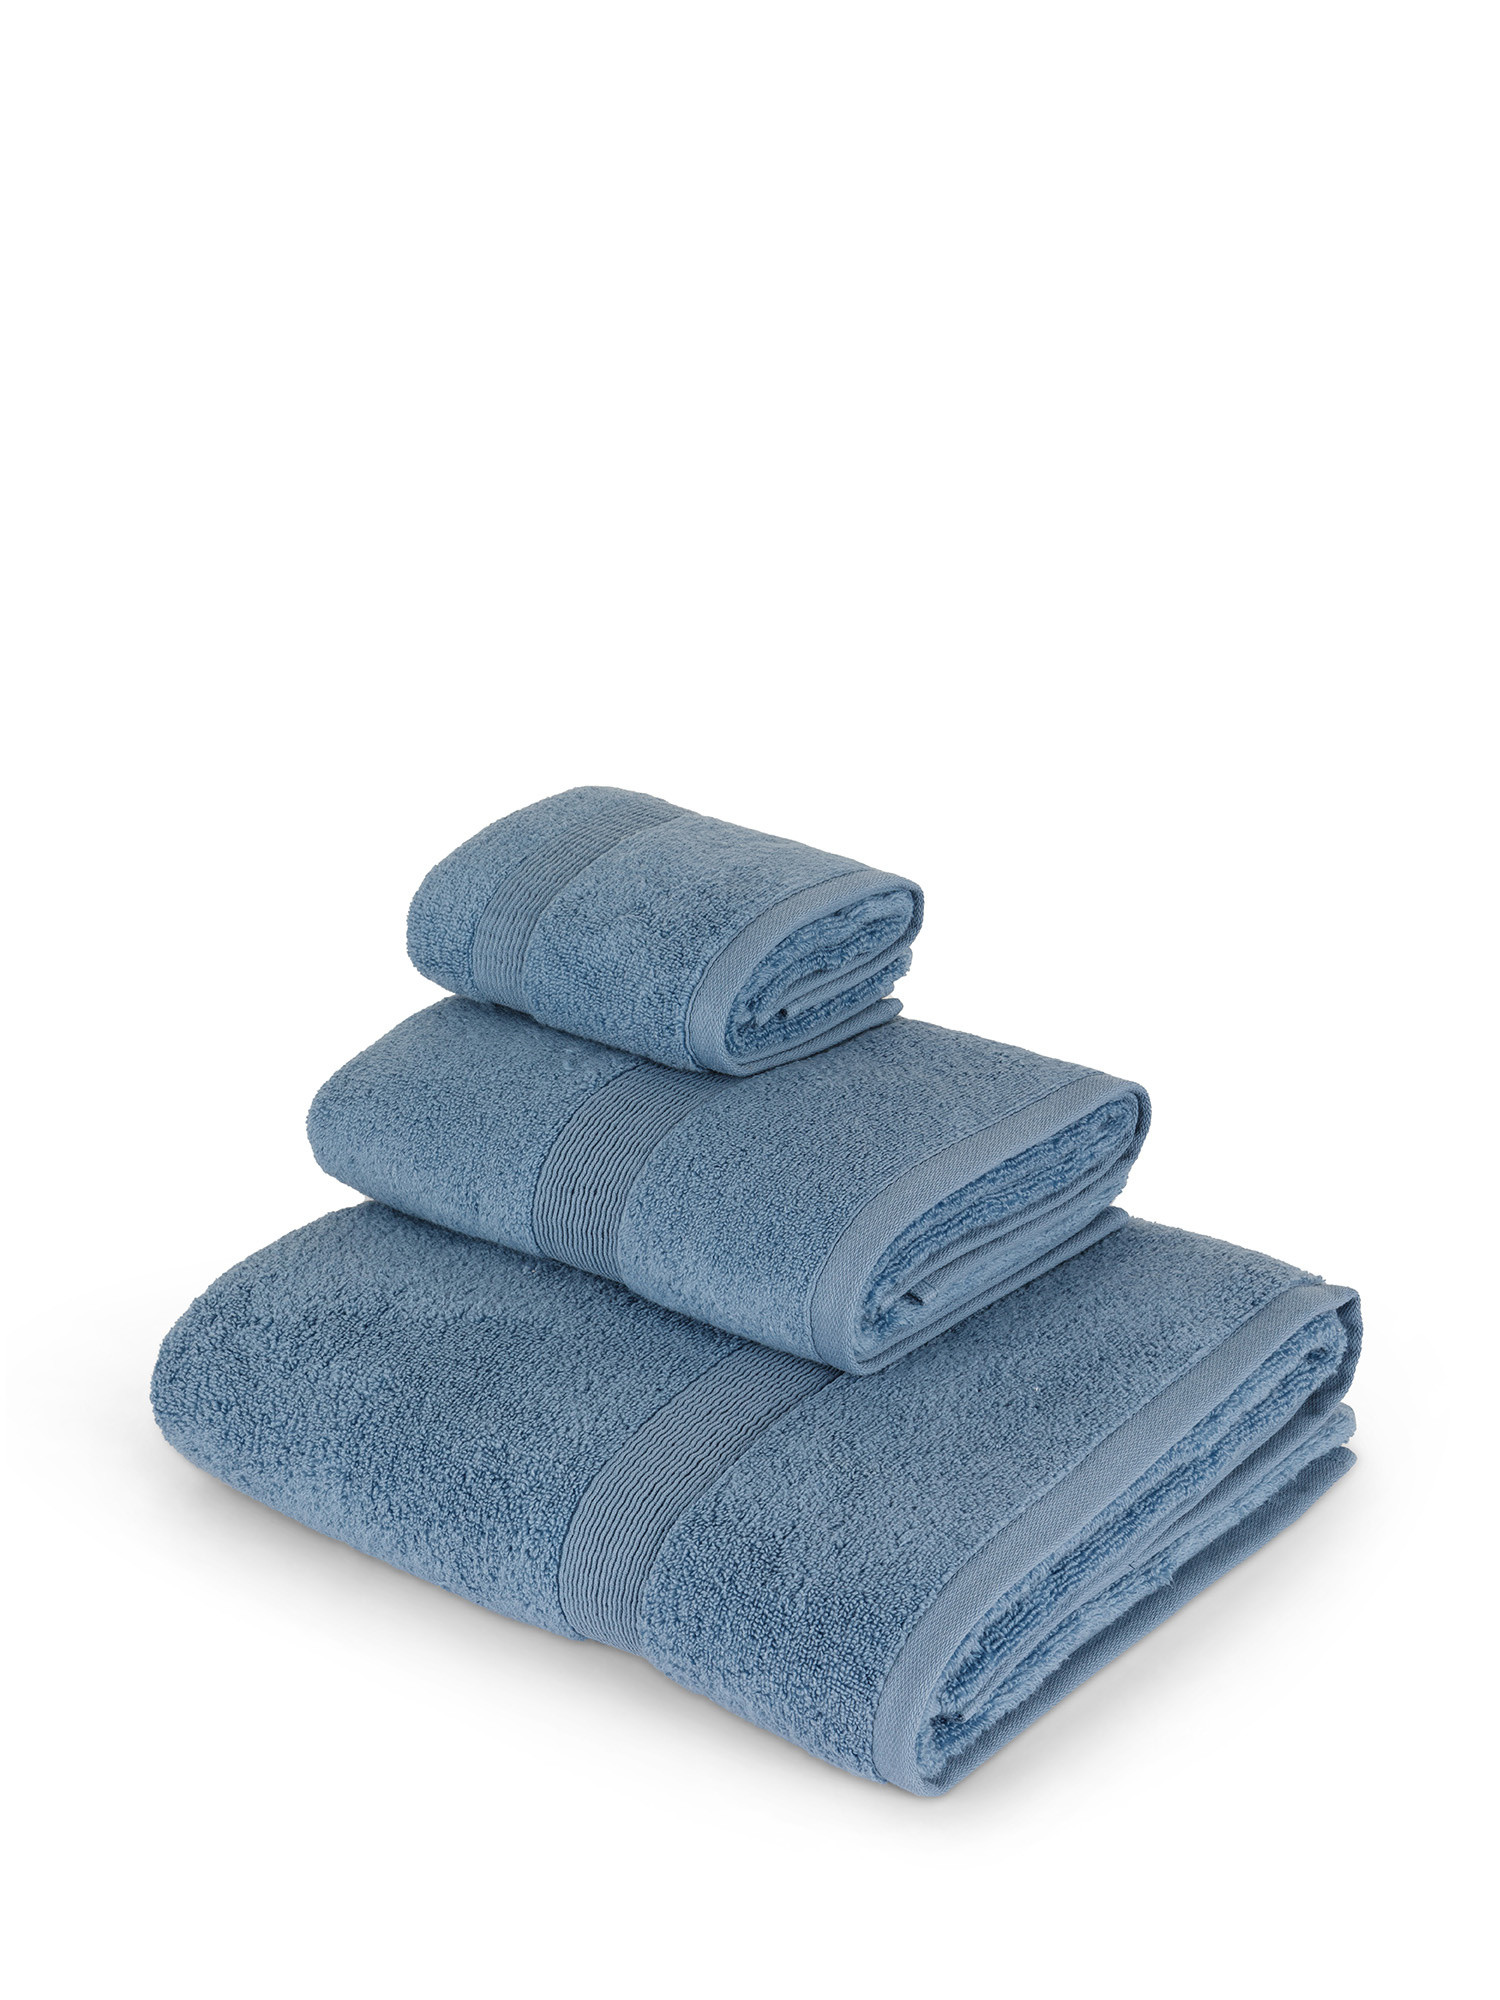 Ultra soft solid color pure cotton terry towel, Blue, large image number 0